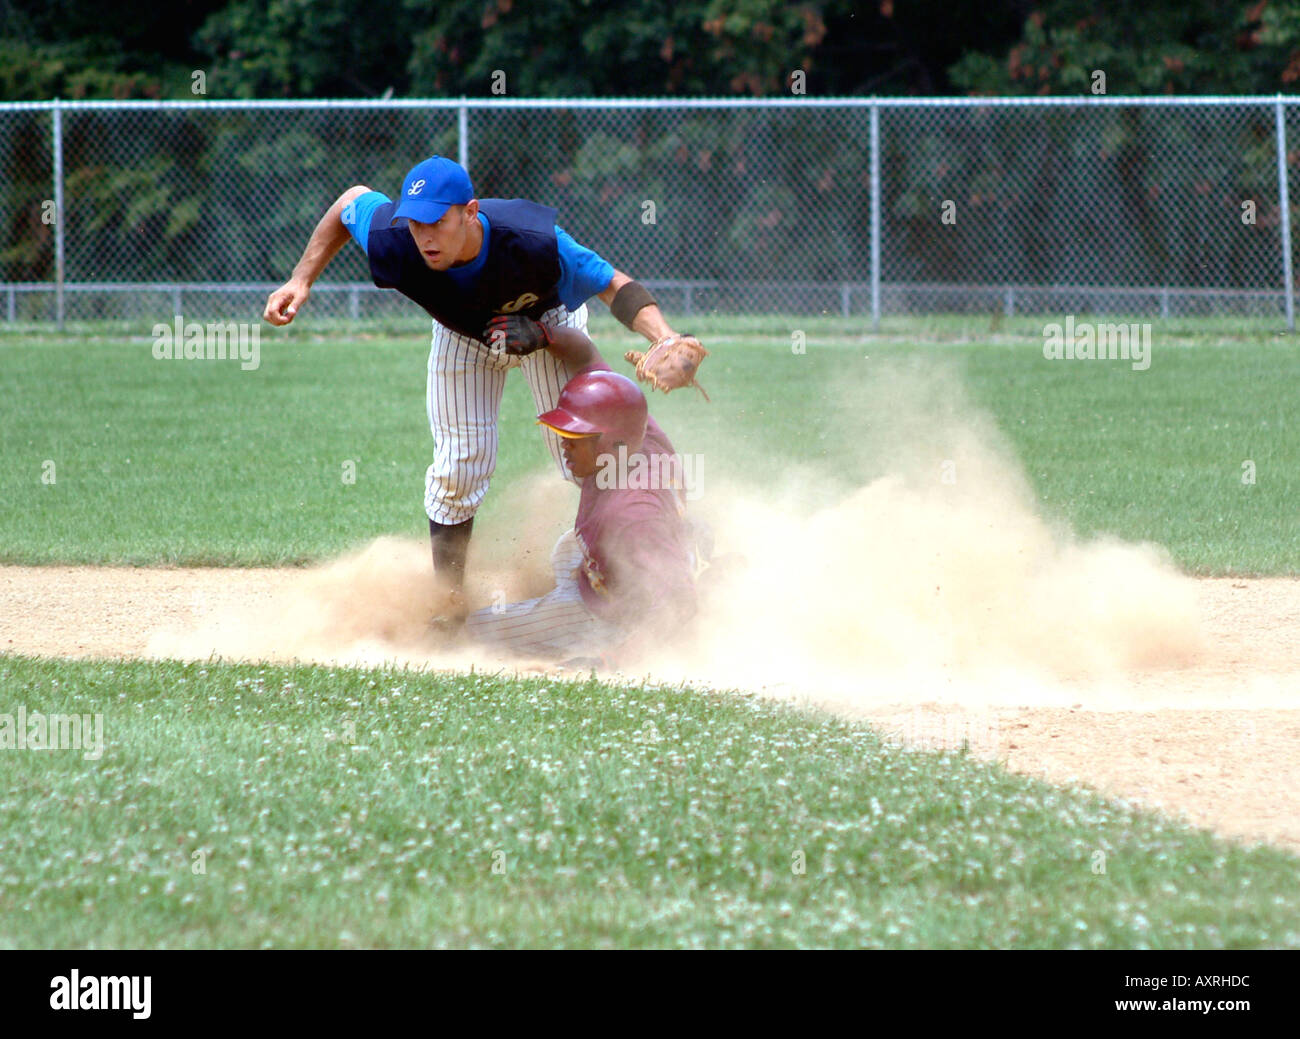 Player slides into 2nd base Stock Photo